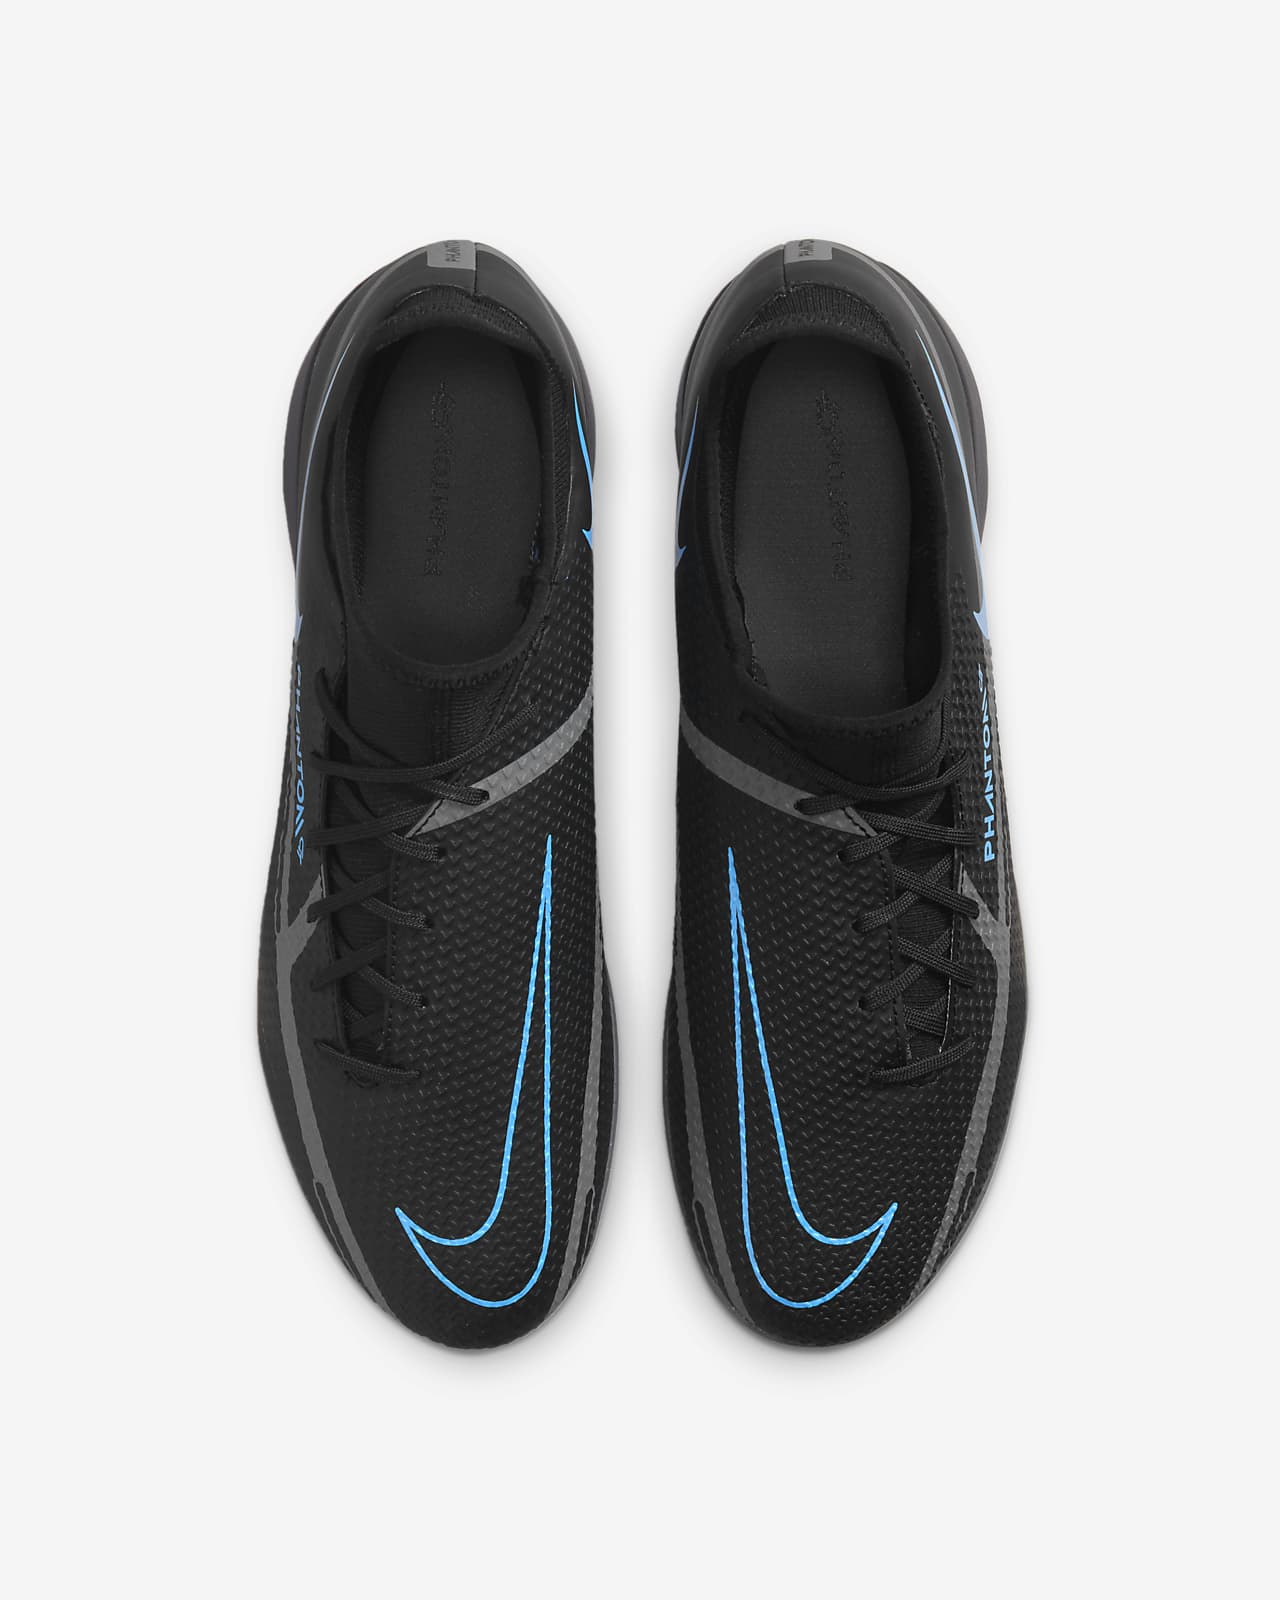 nike phantom gt academy dynamic fit indoor soccer shoes